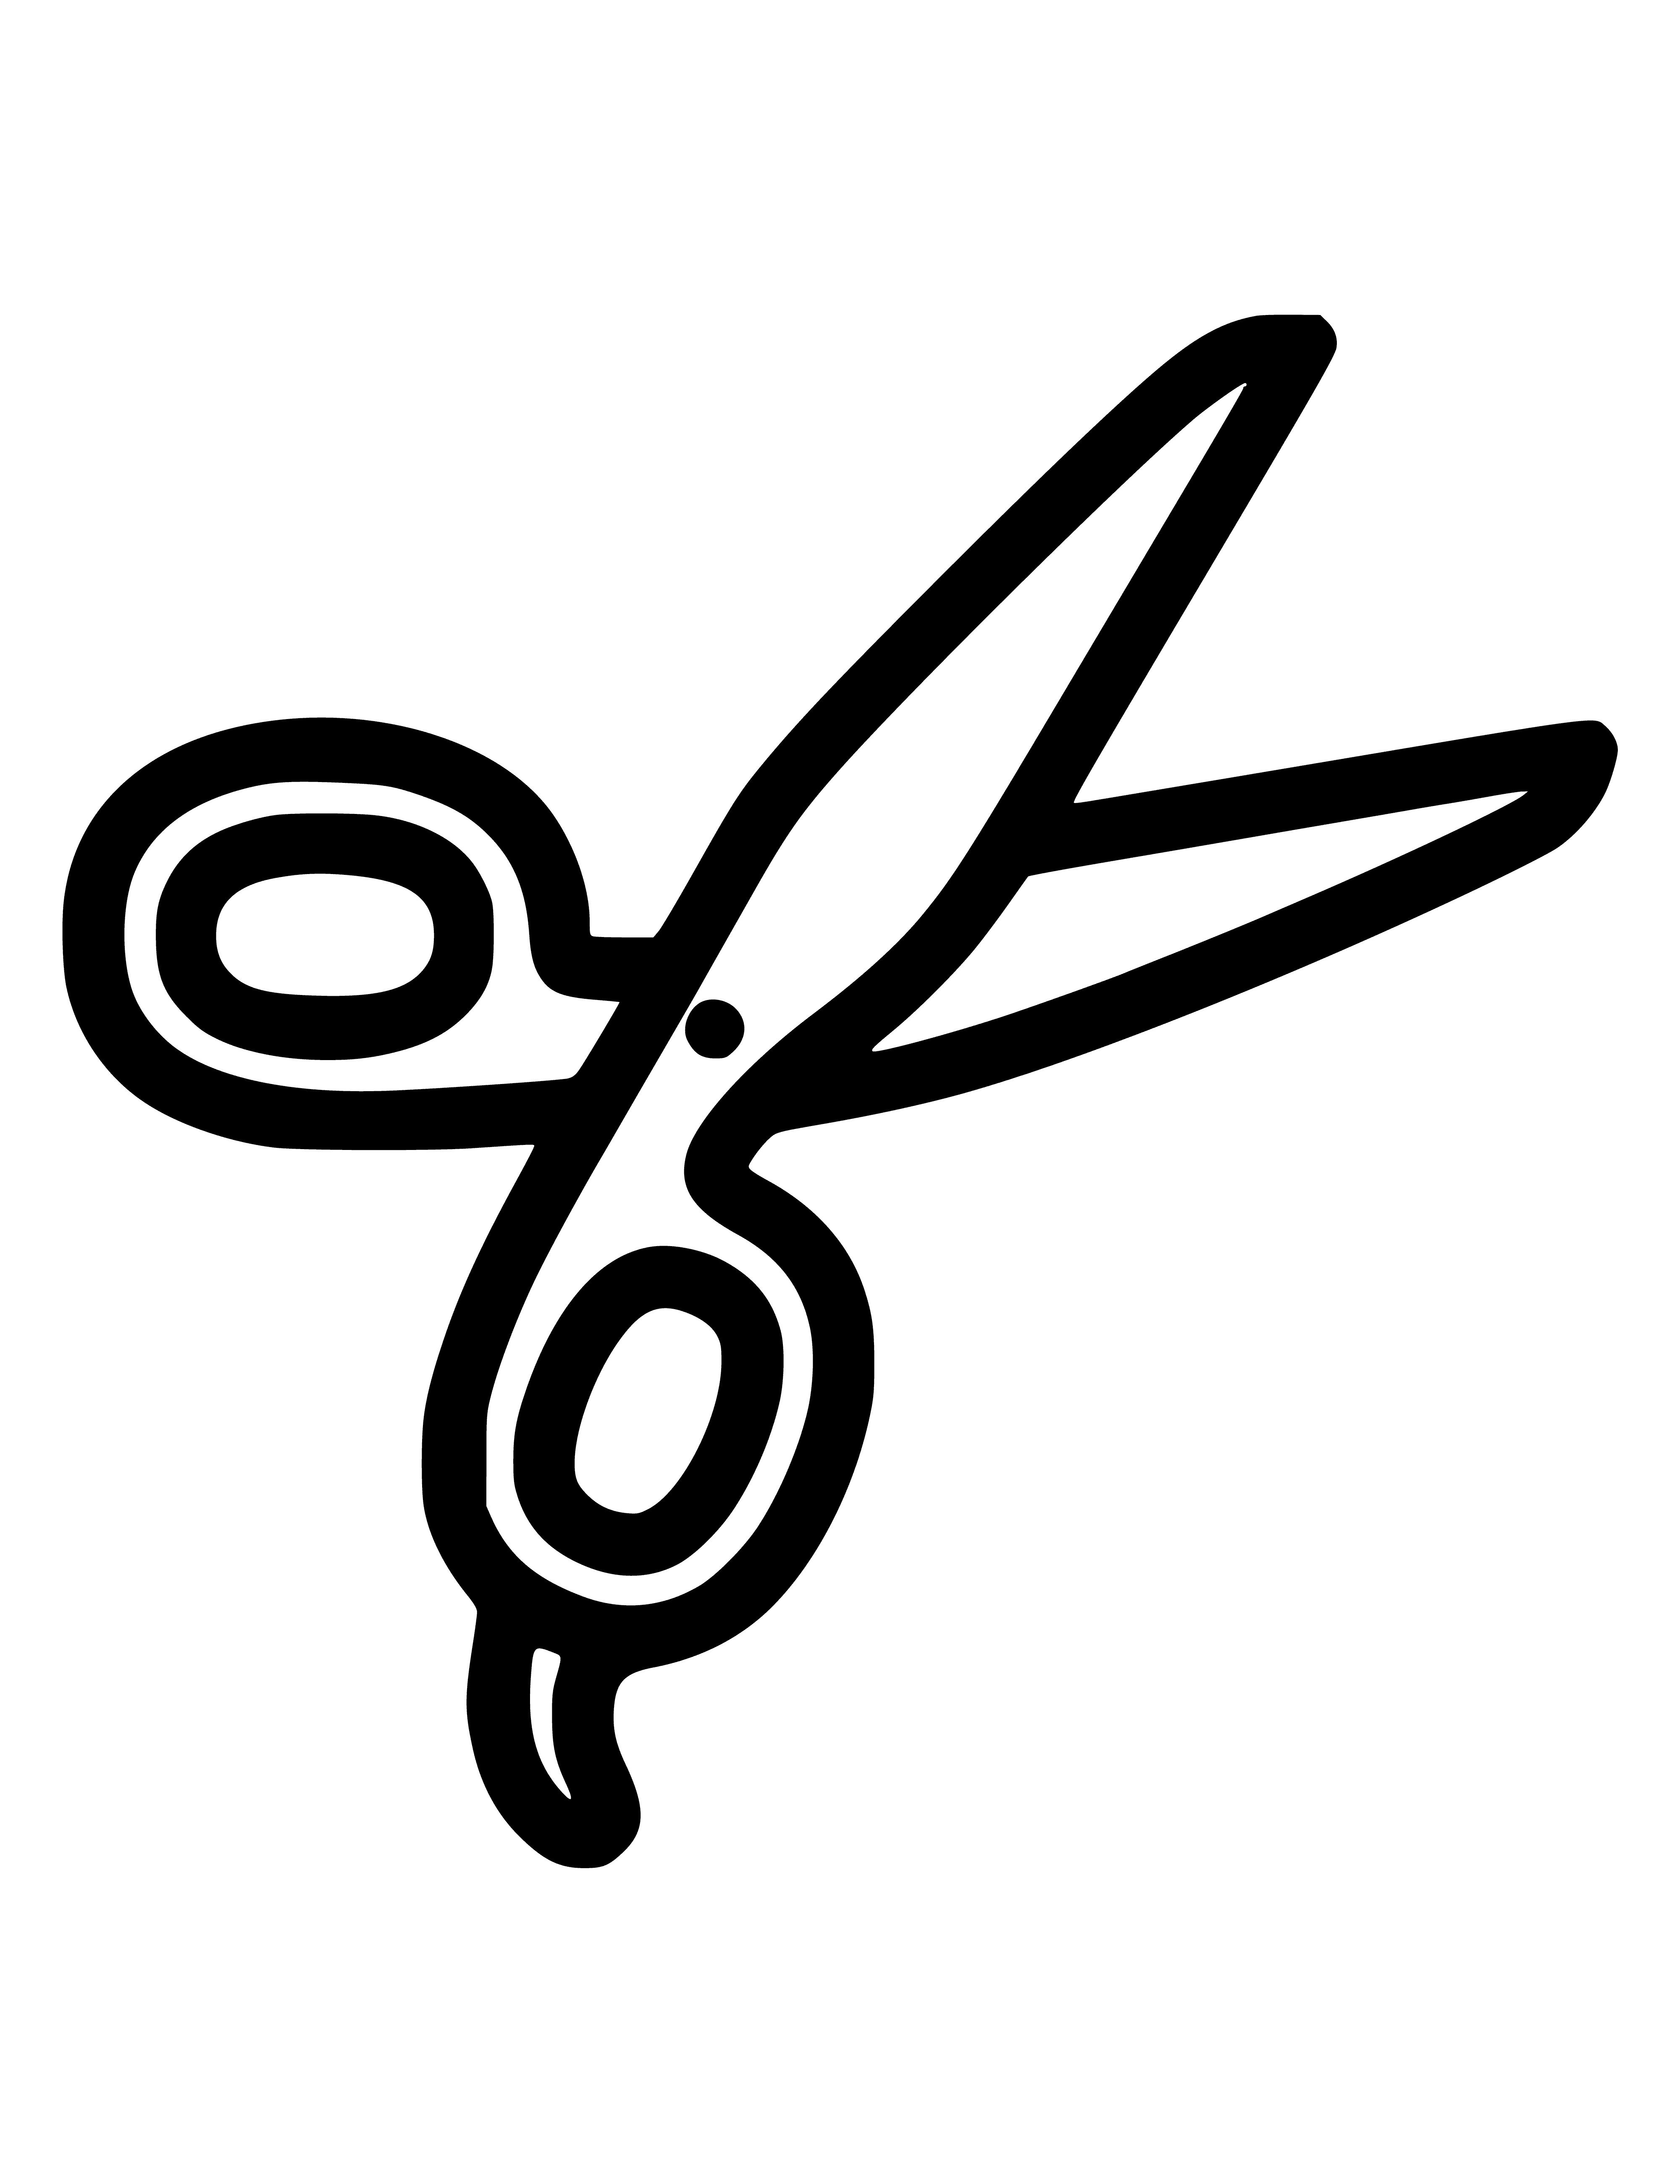 coloring page: into pieces. 

Scissors for cutting paper, cloth, etc. into pieces using two metal blades with a gap between them.